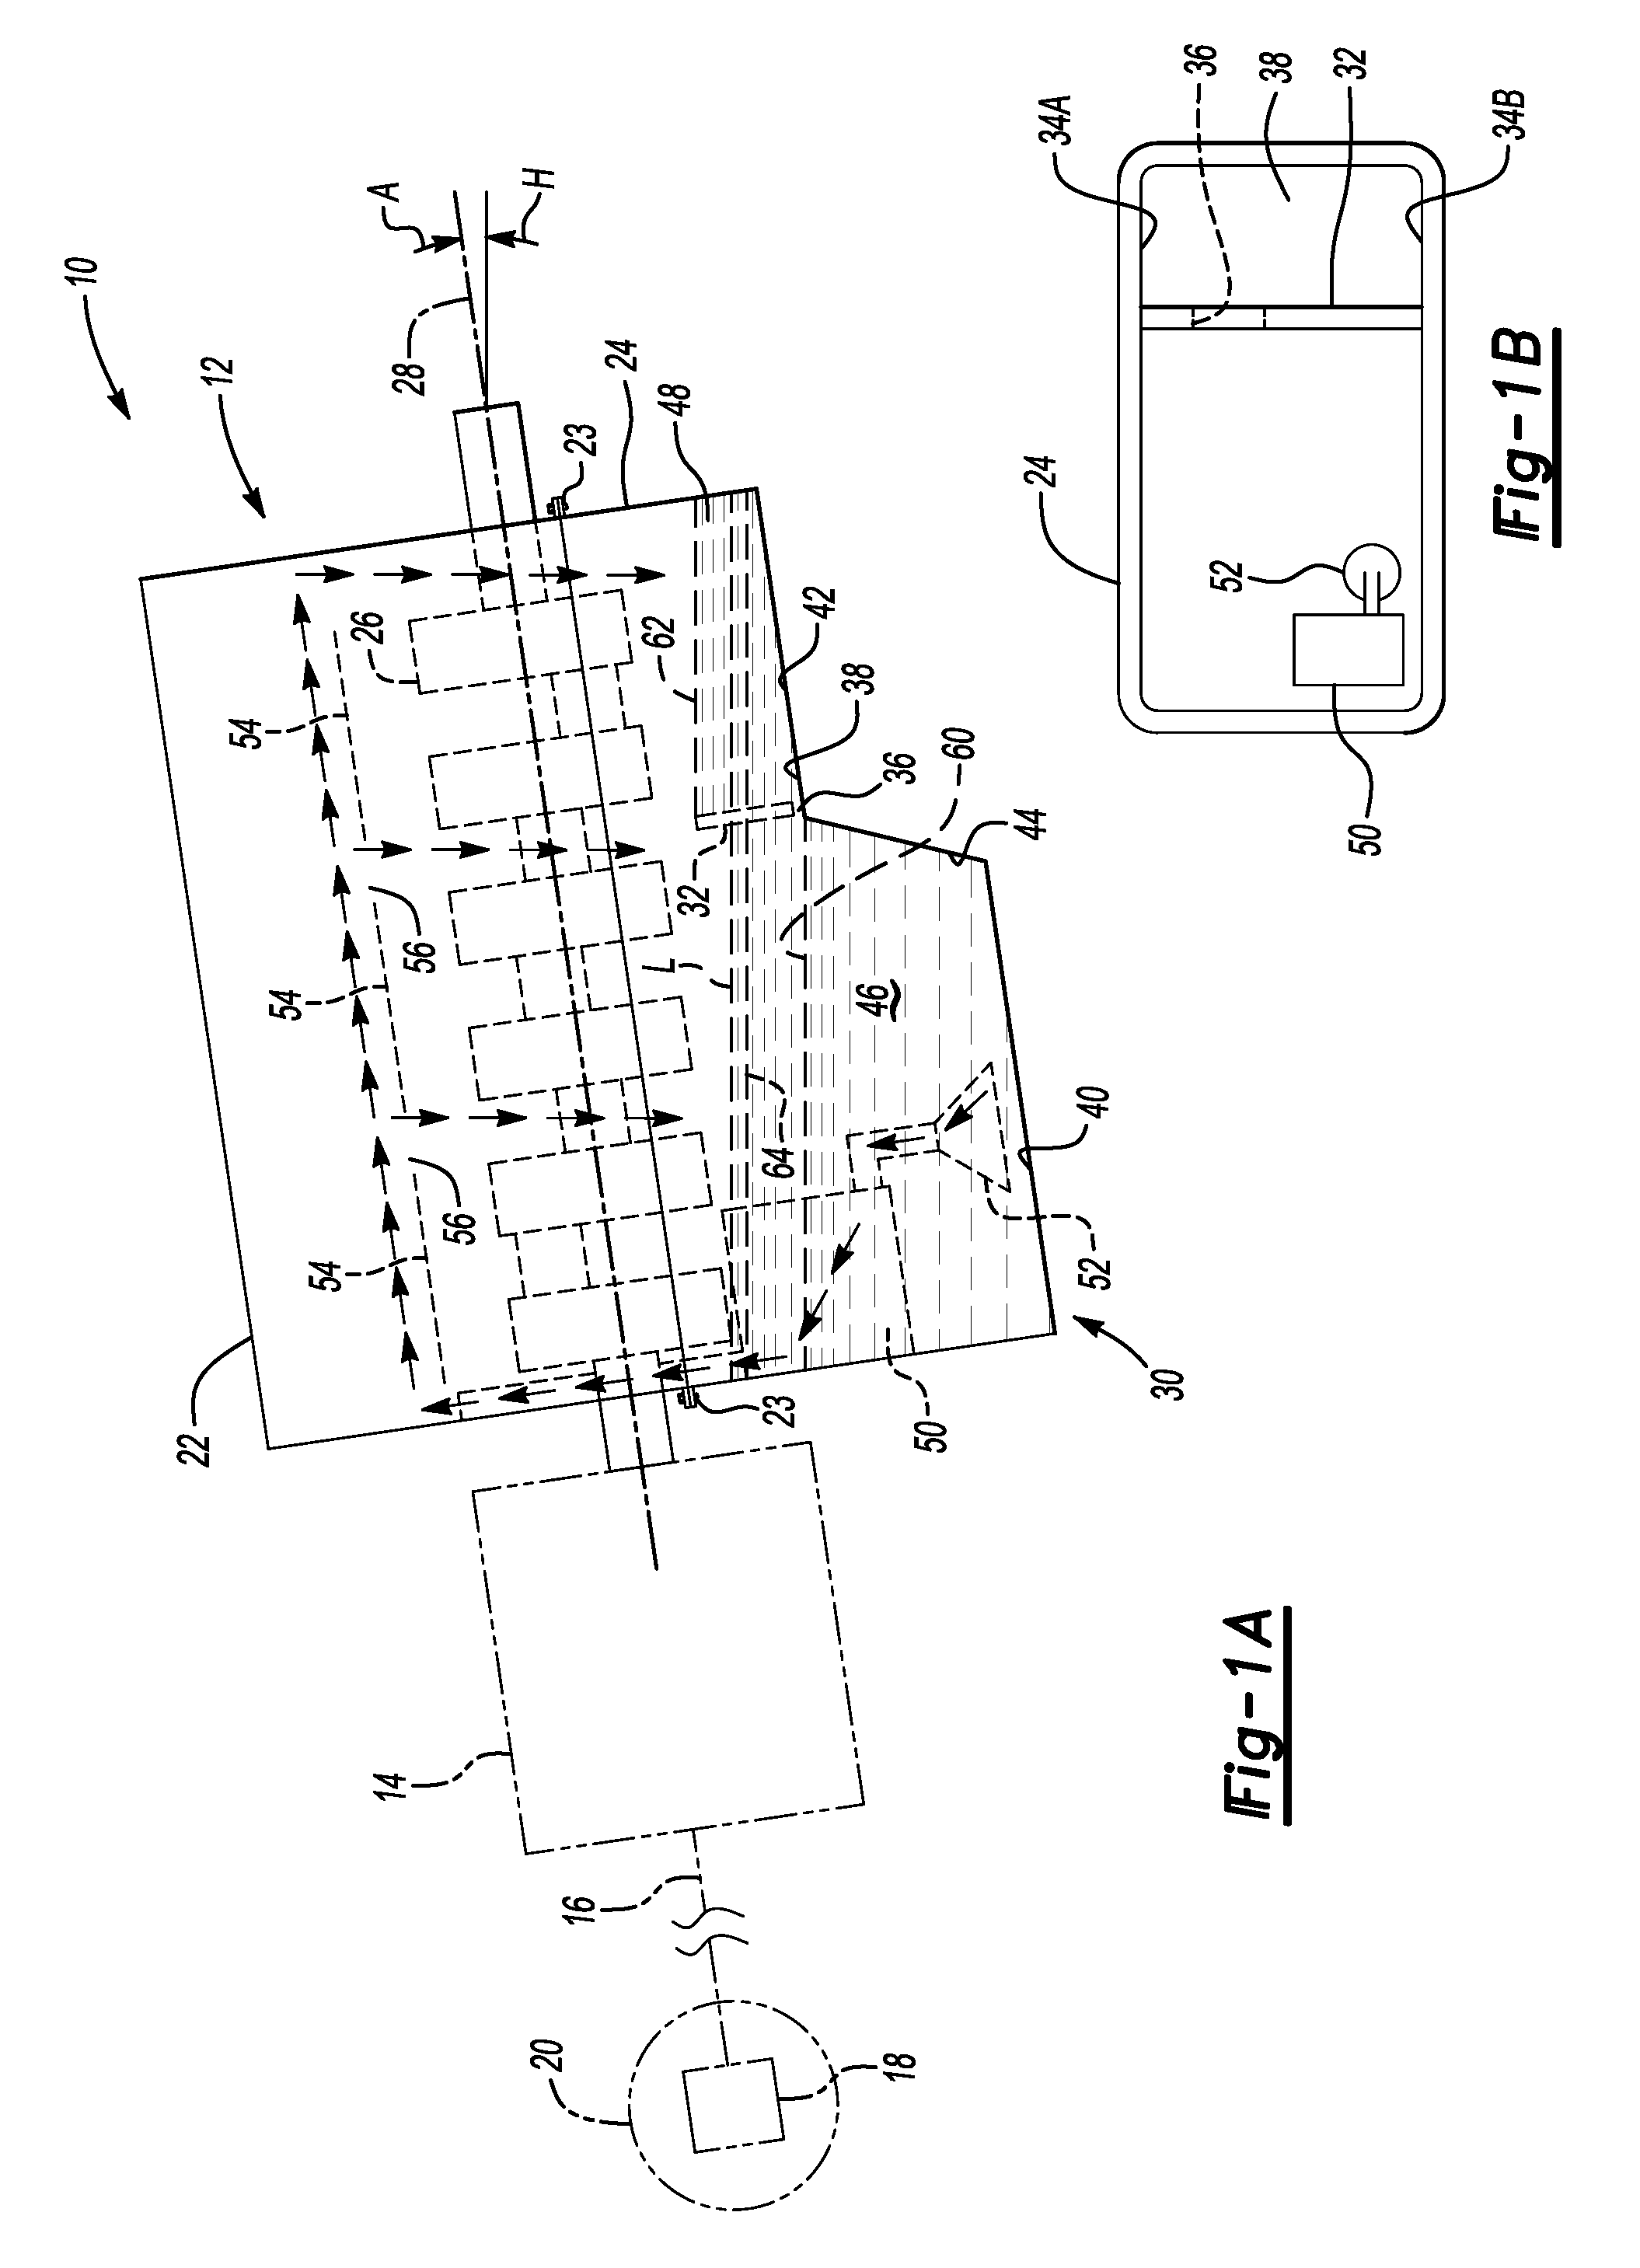 Engine Oil Level Management System and Method of Assembling Engines in Vehicles